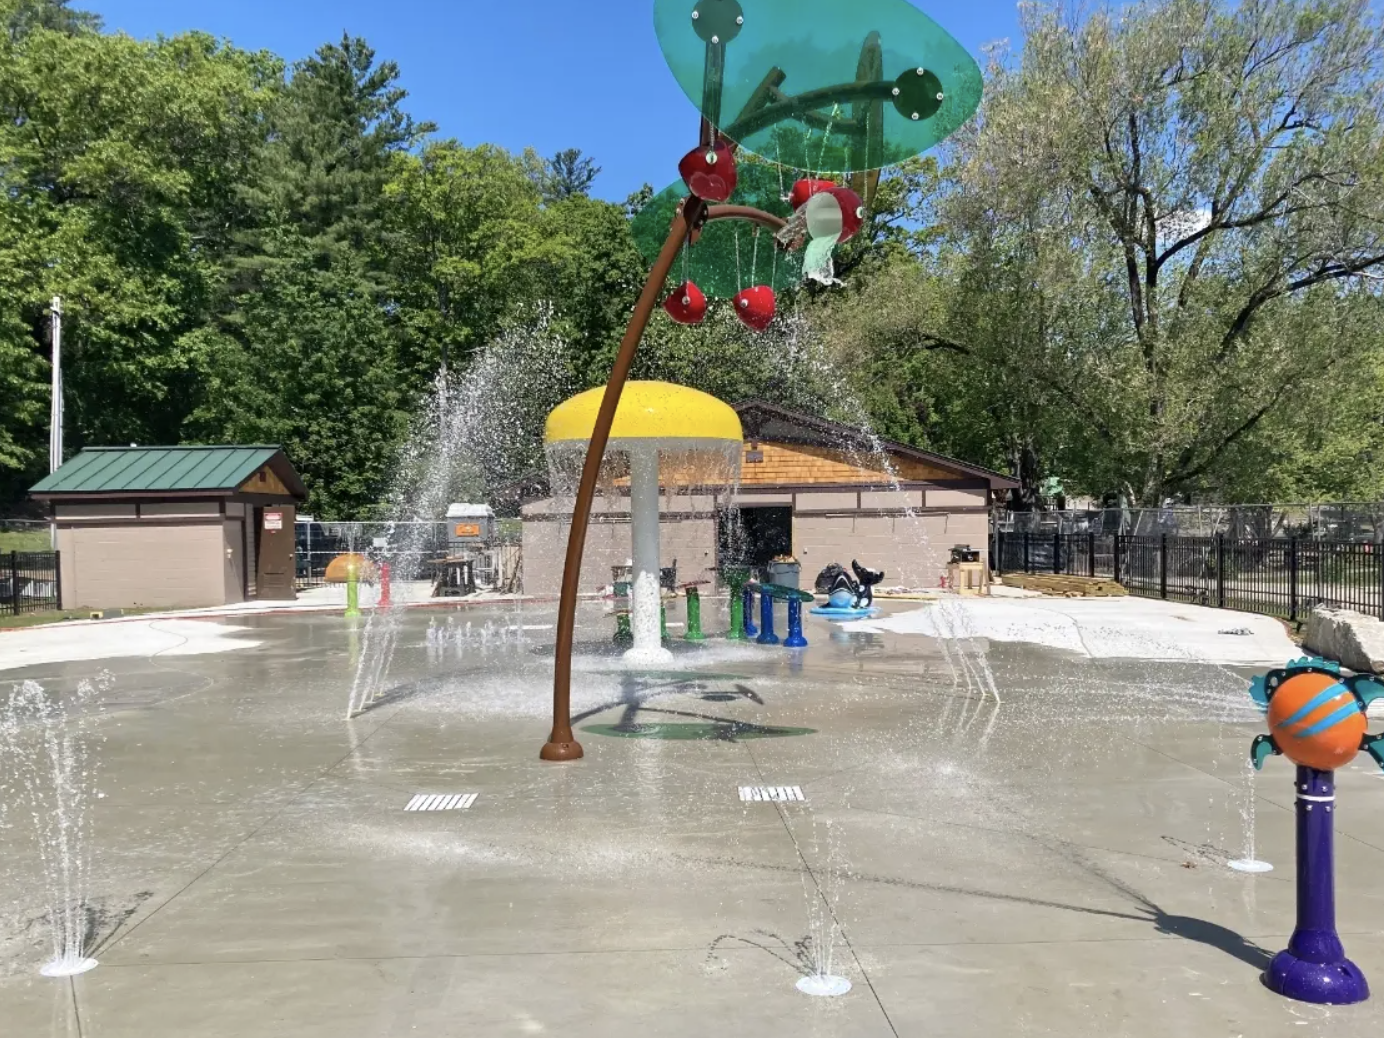 Celebrating the Grand Opening of Concord’s New Splash Pad